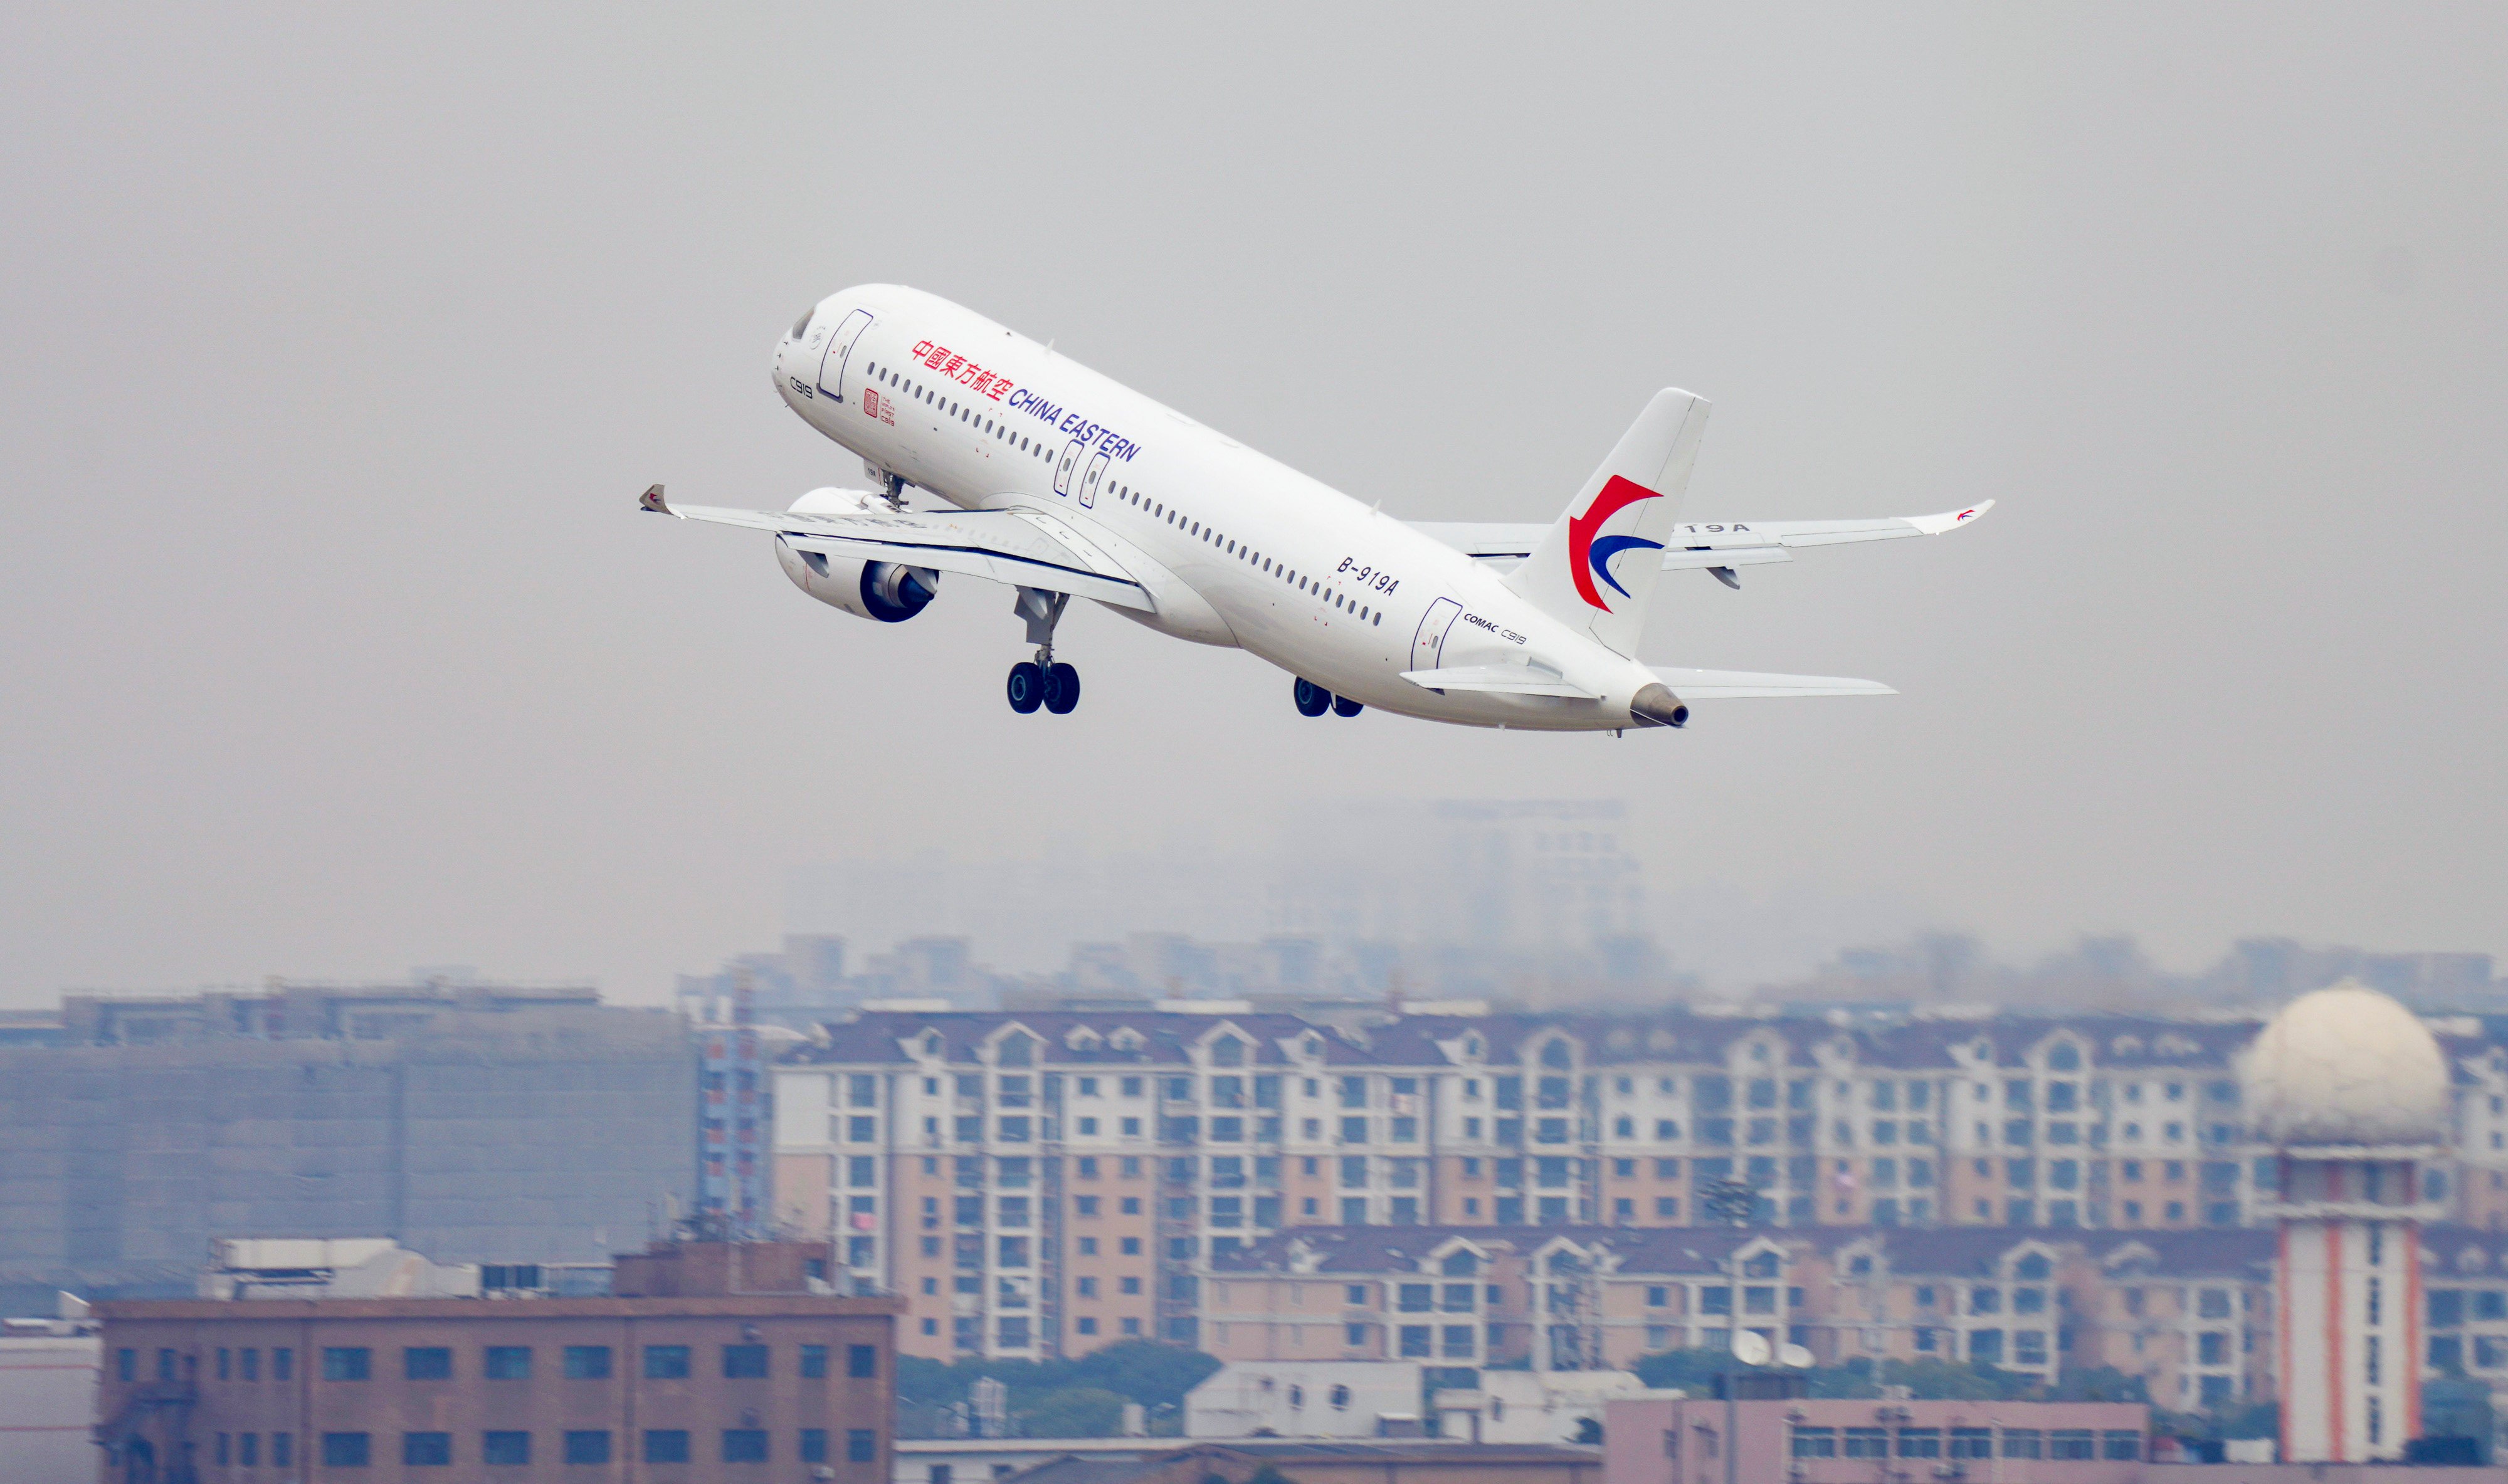 Comac delivered the second C919 to China Eastern Airlines earlier this month. Photo: Xinhua